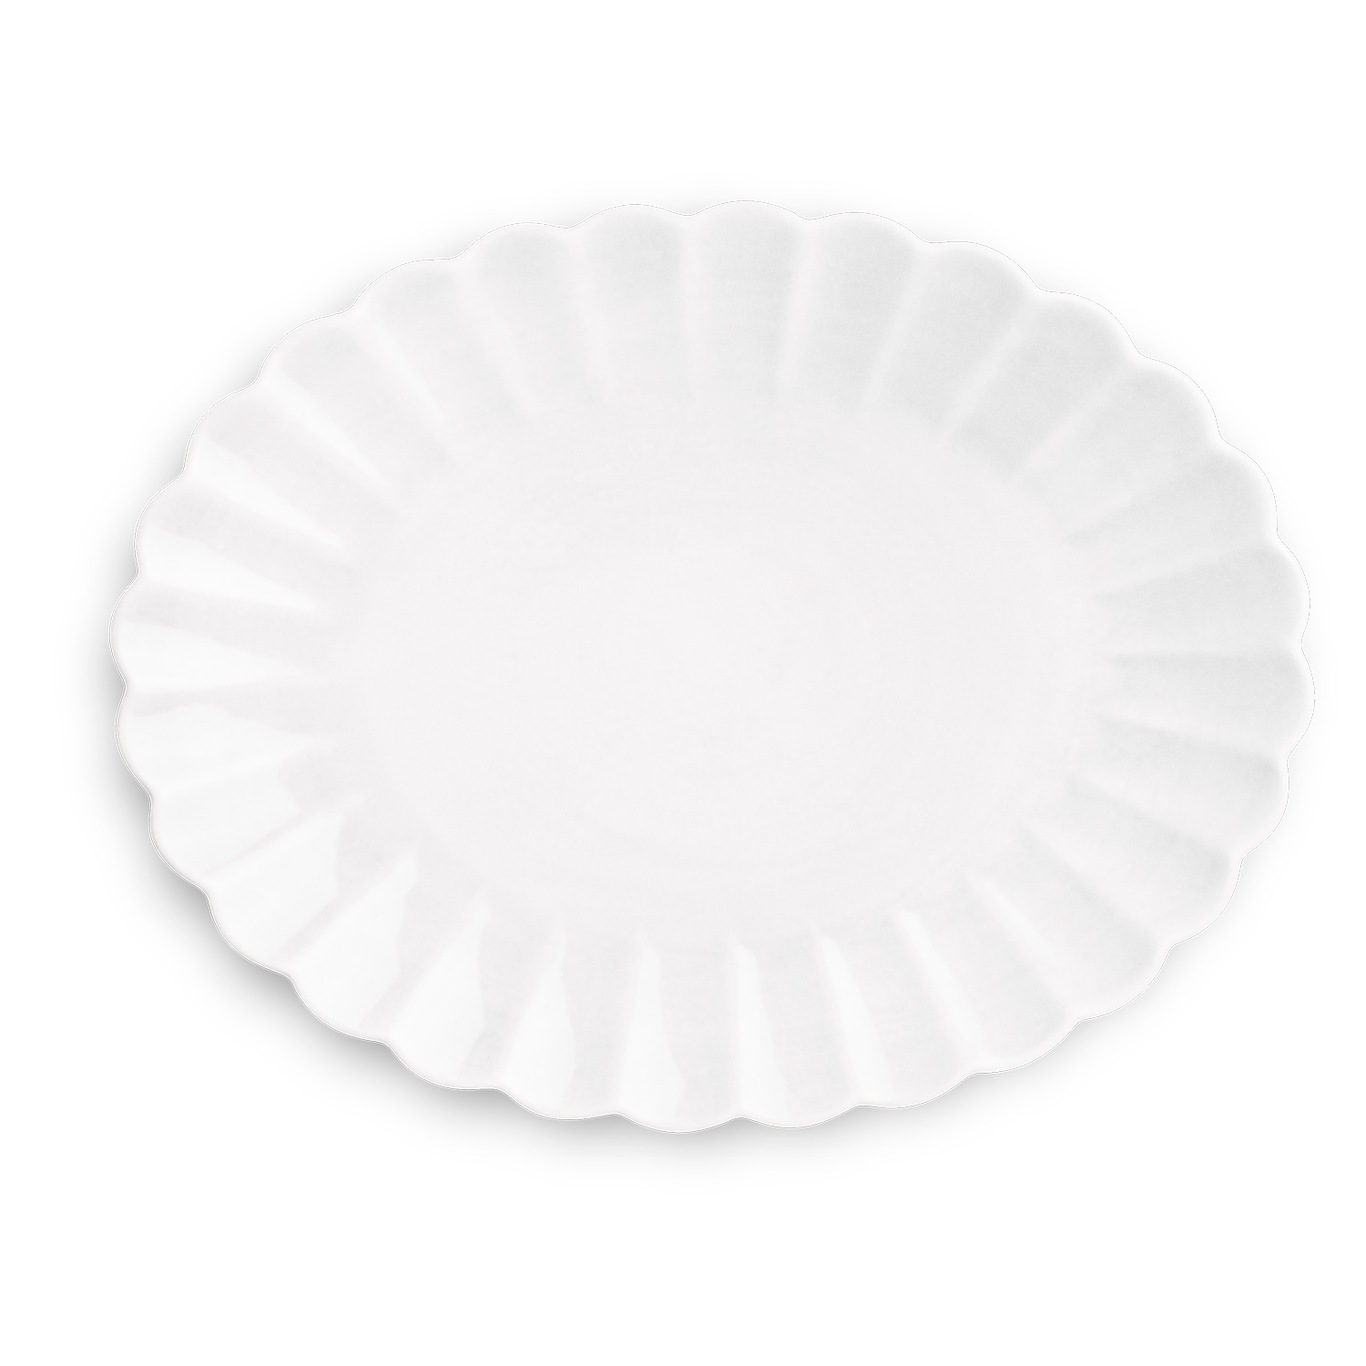 Oyster Dish 35x30 cm, White